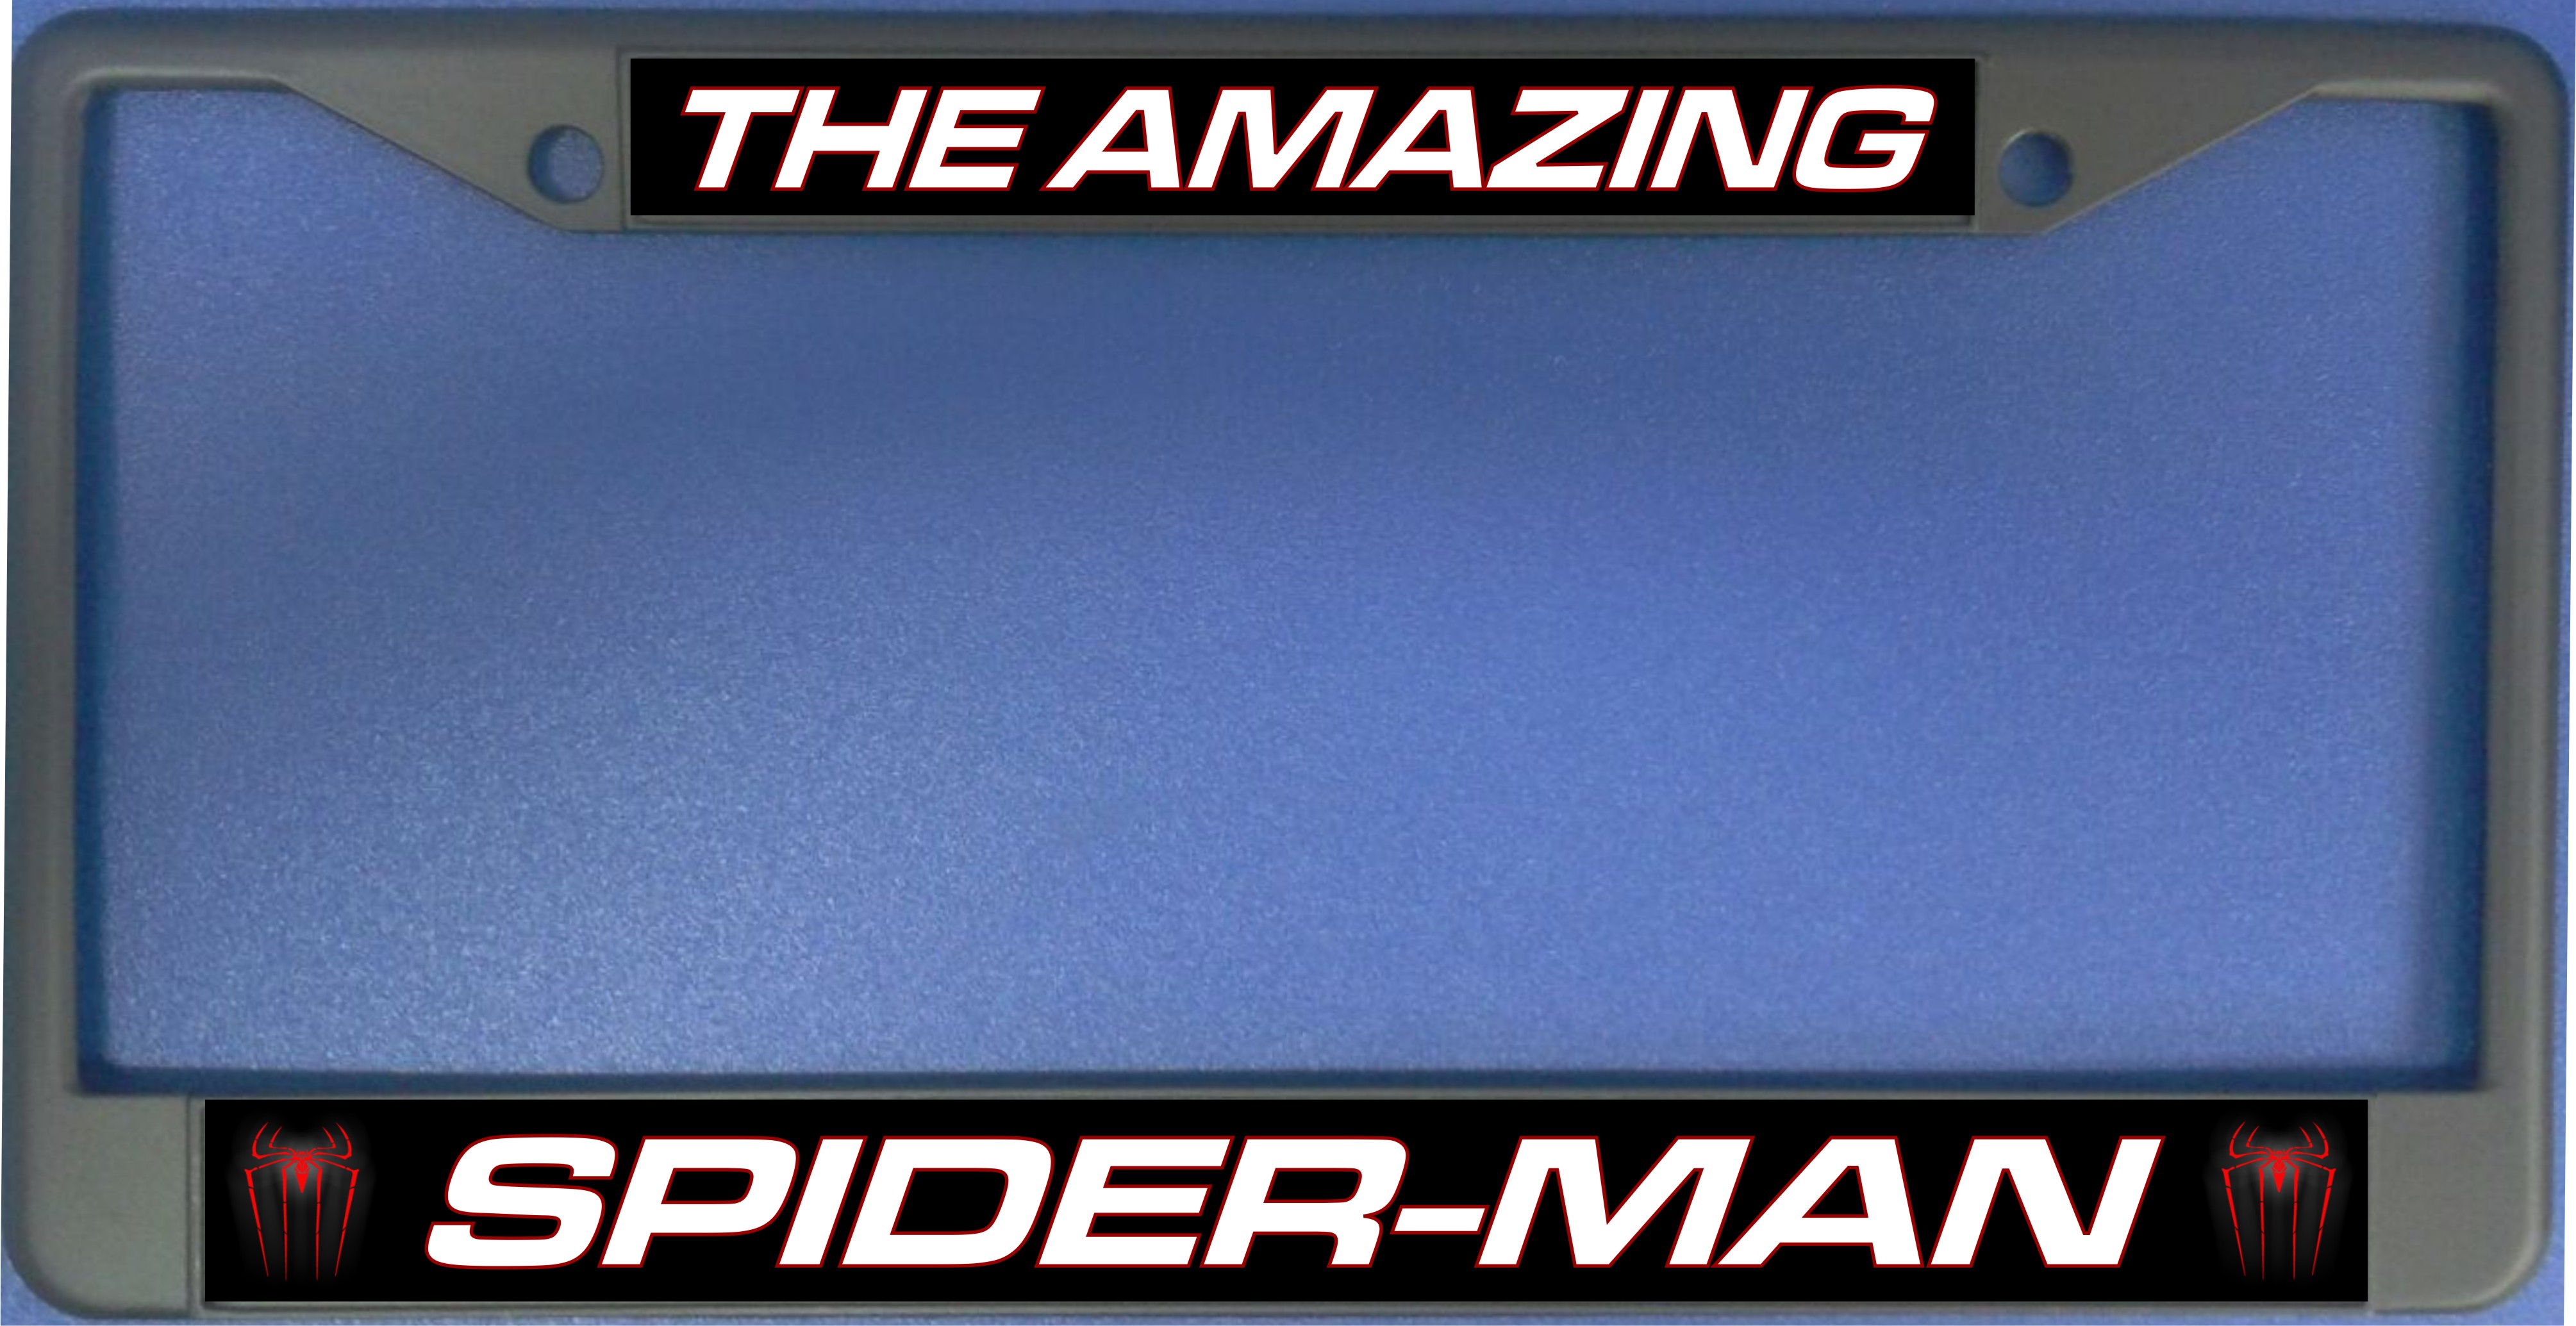 The Amazing Spider Man Photo License Plate Frame  Free SCREW Caps with this Frame